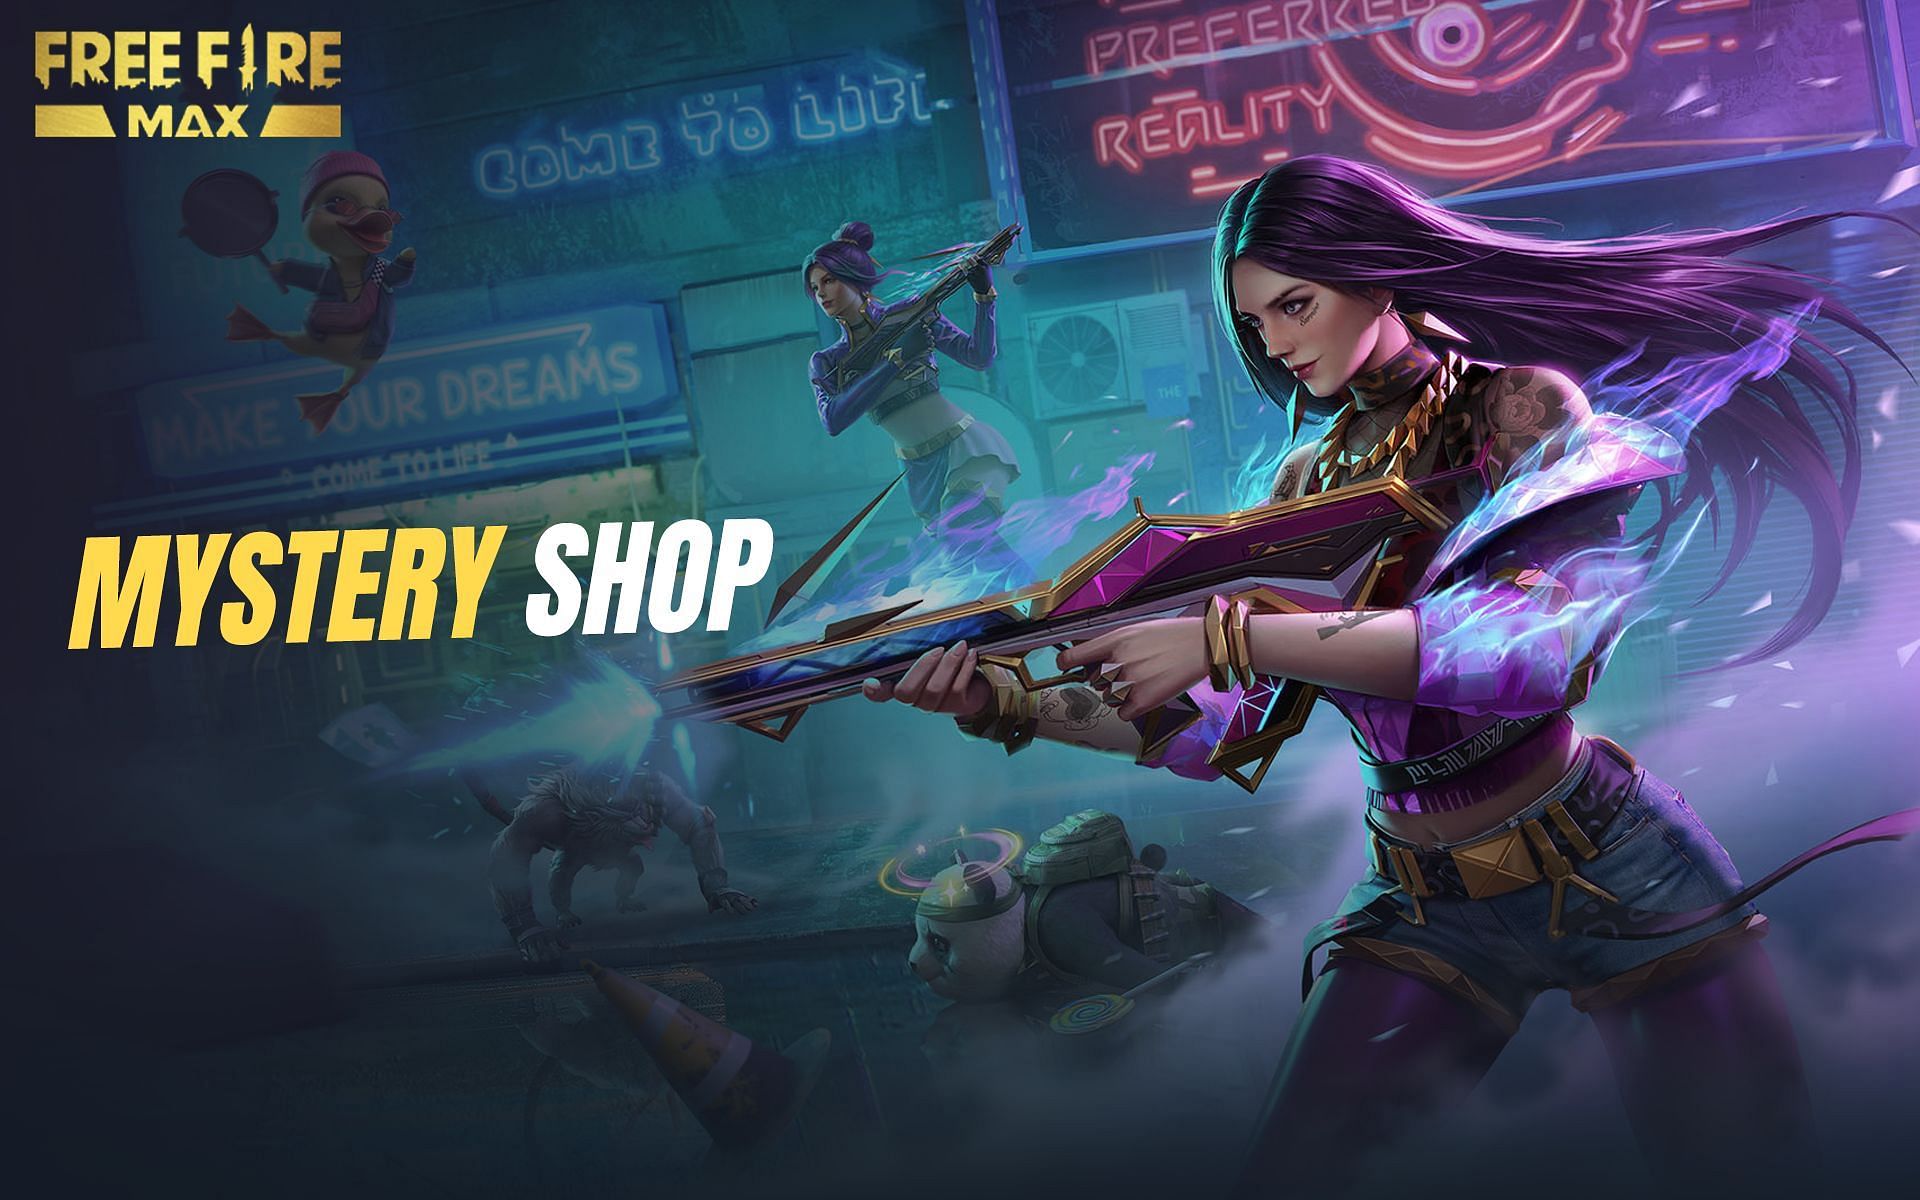 Mystery Shop event in Free Fire MAX (Image via Garena)